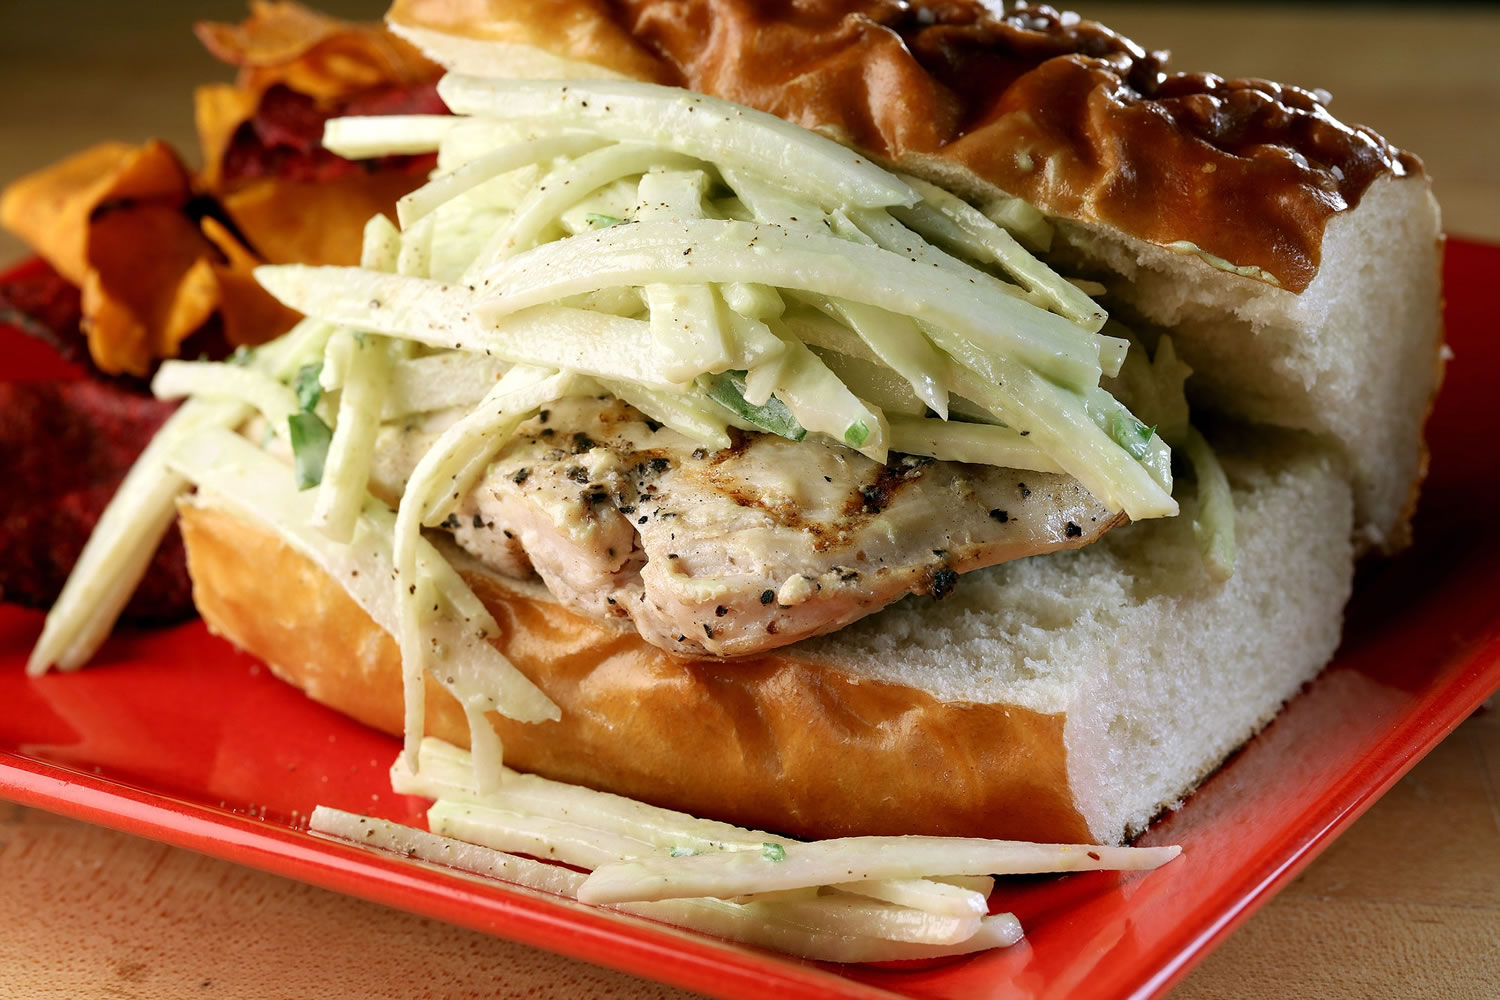 Pile this slaw on a chicken sandwich and enjoy.